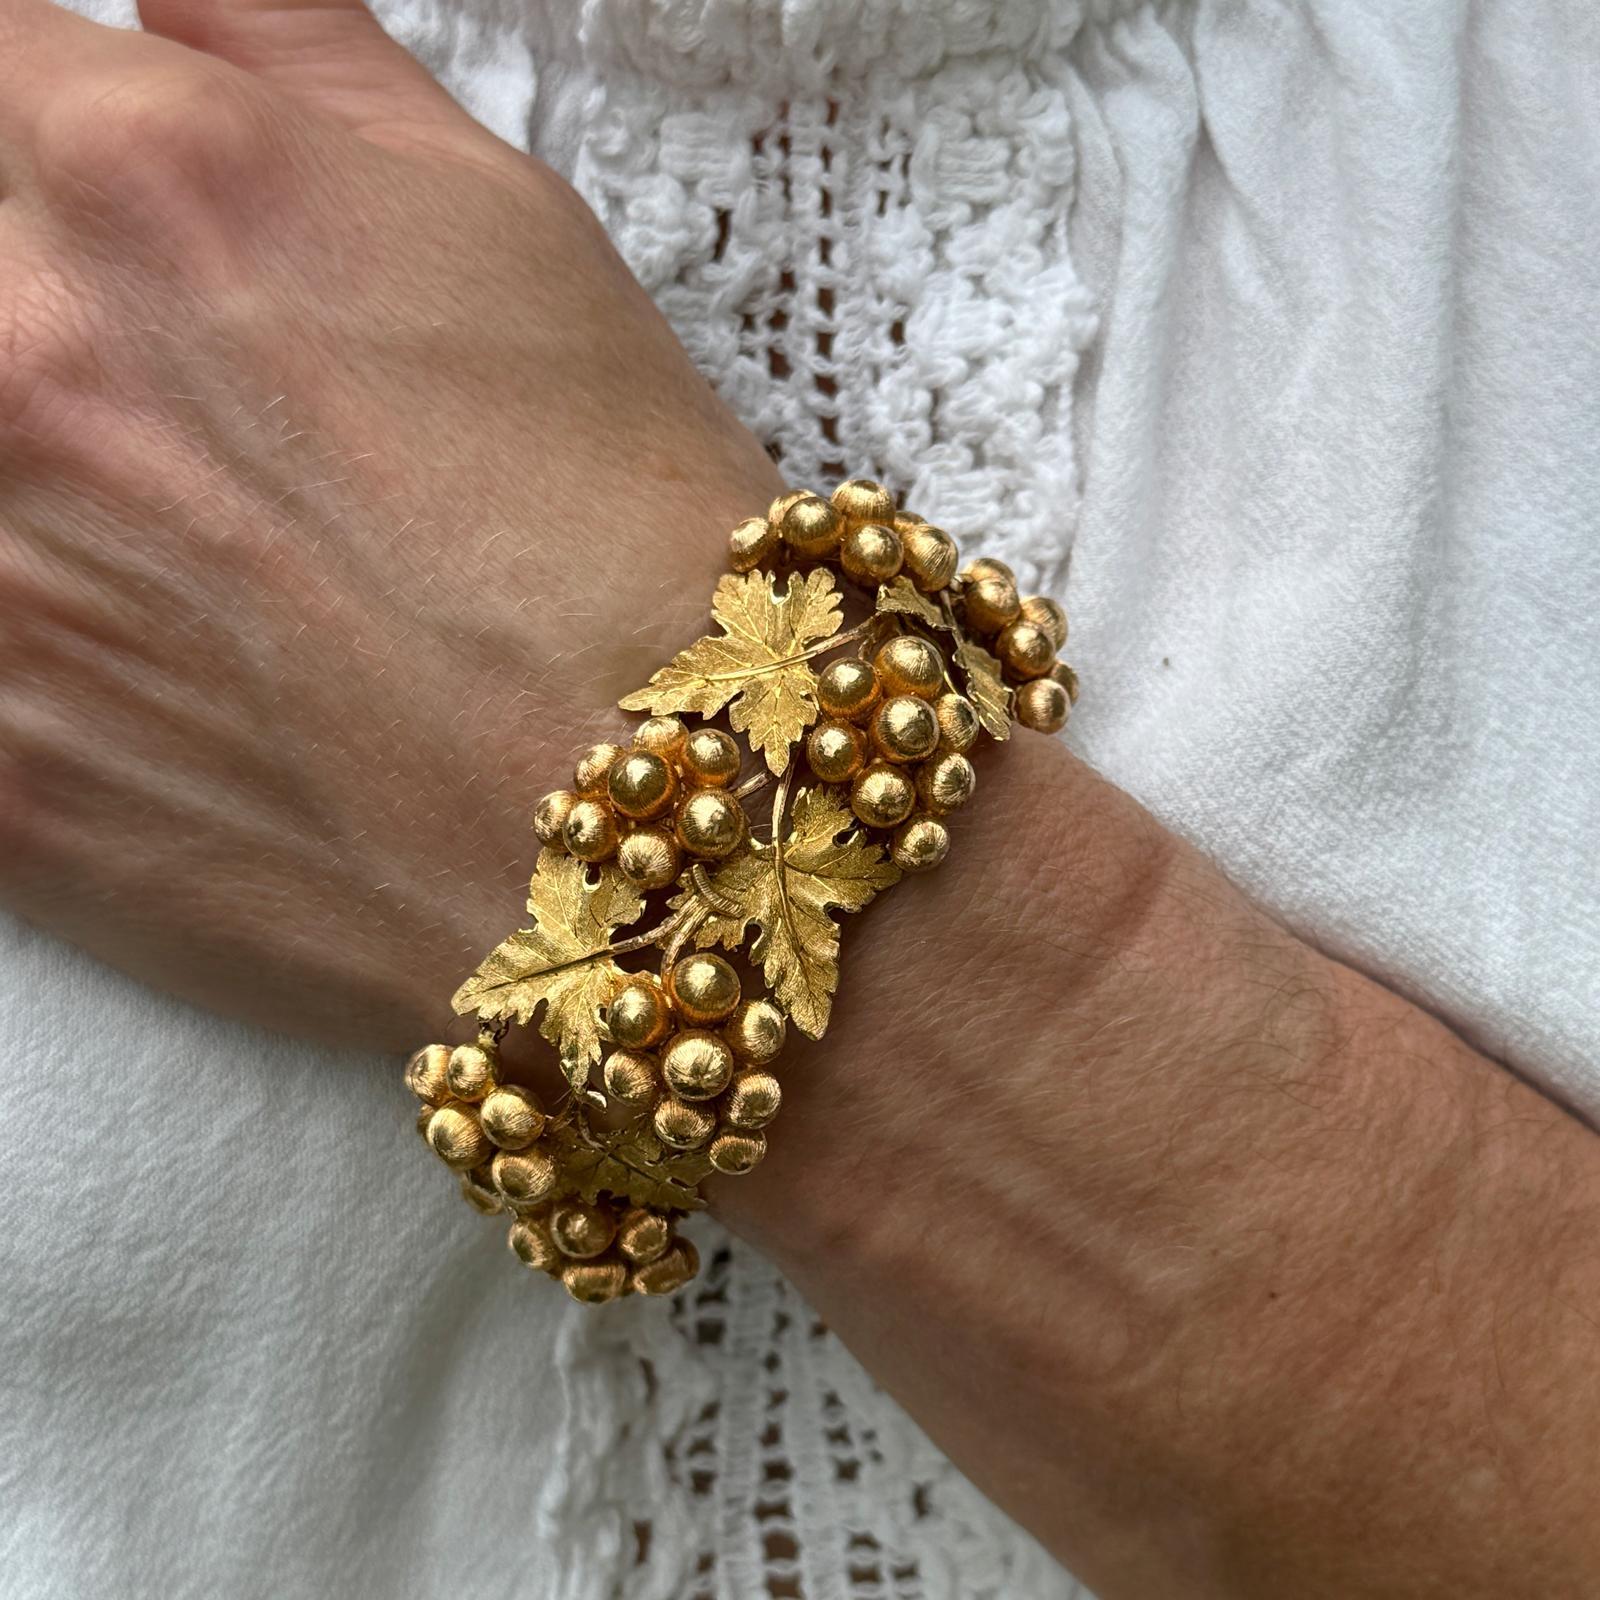 The Buccellati vintage grape leaf bracelet is a statement piece that effortlessly combines natural inspiration with exquisite craftsmanship. Hand crafted in 18 karat yellow gold, this bracelet is a timeless piece that exudes elegance and